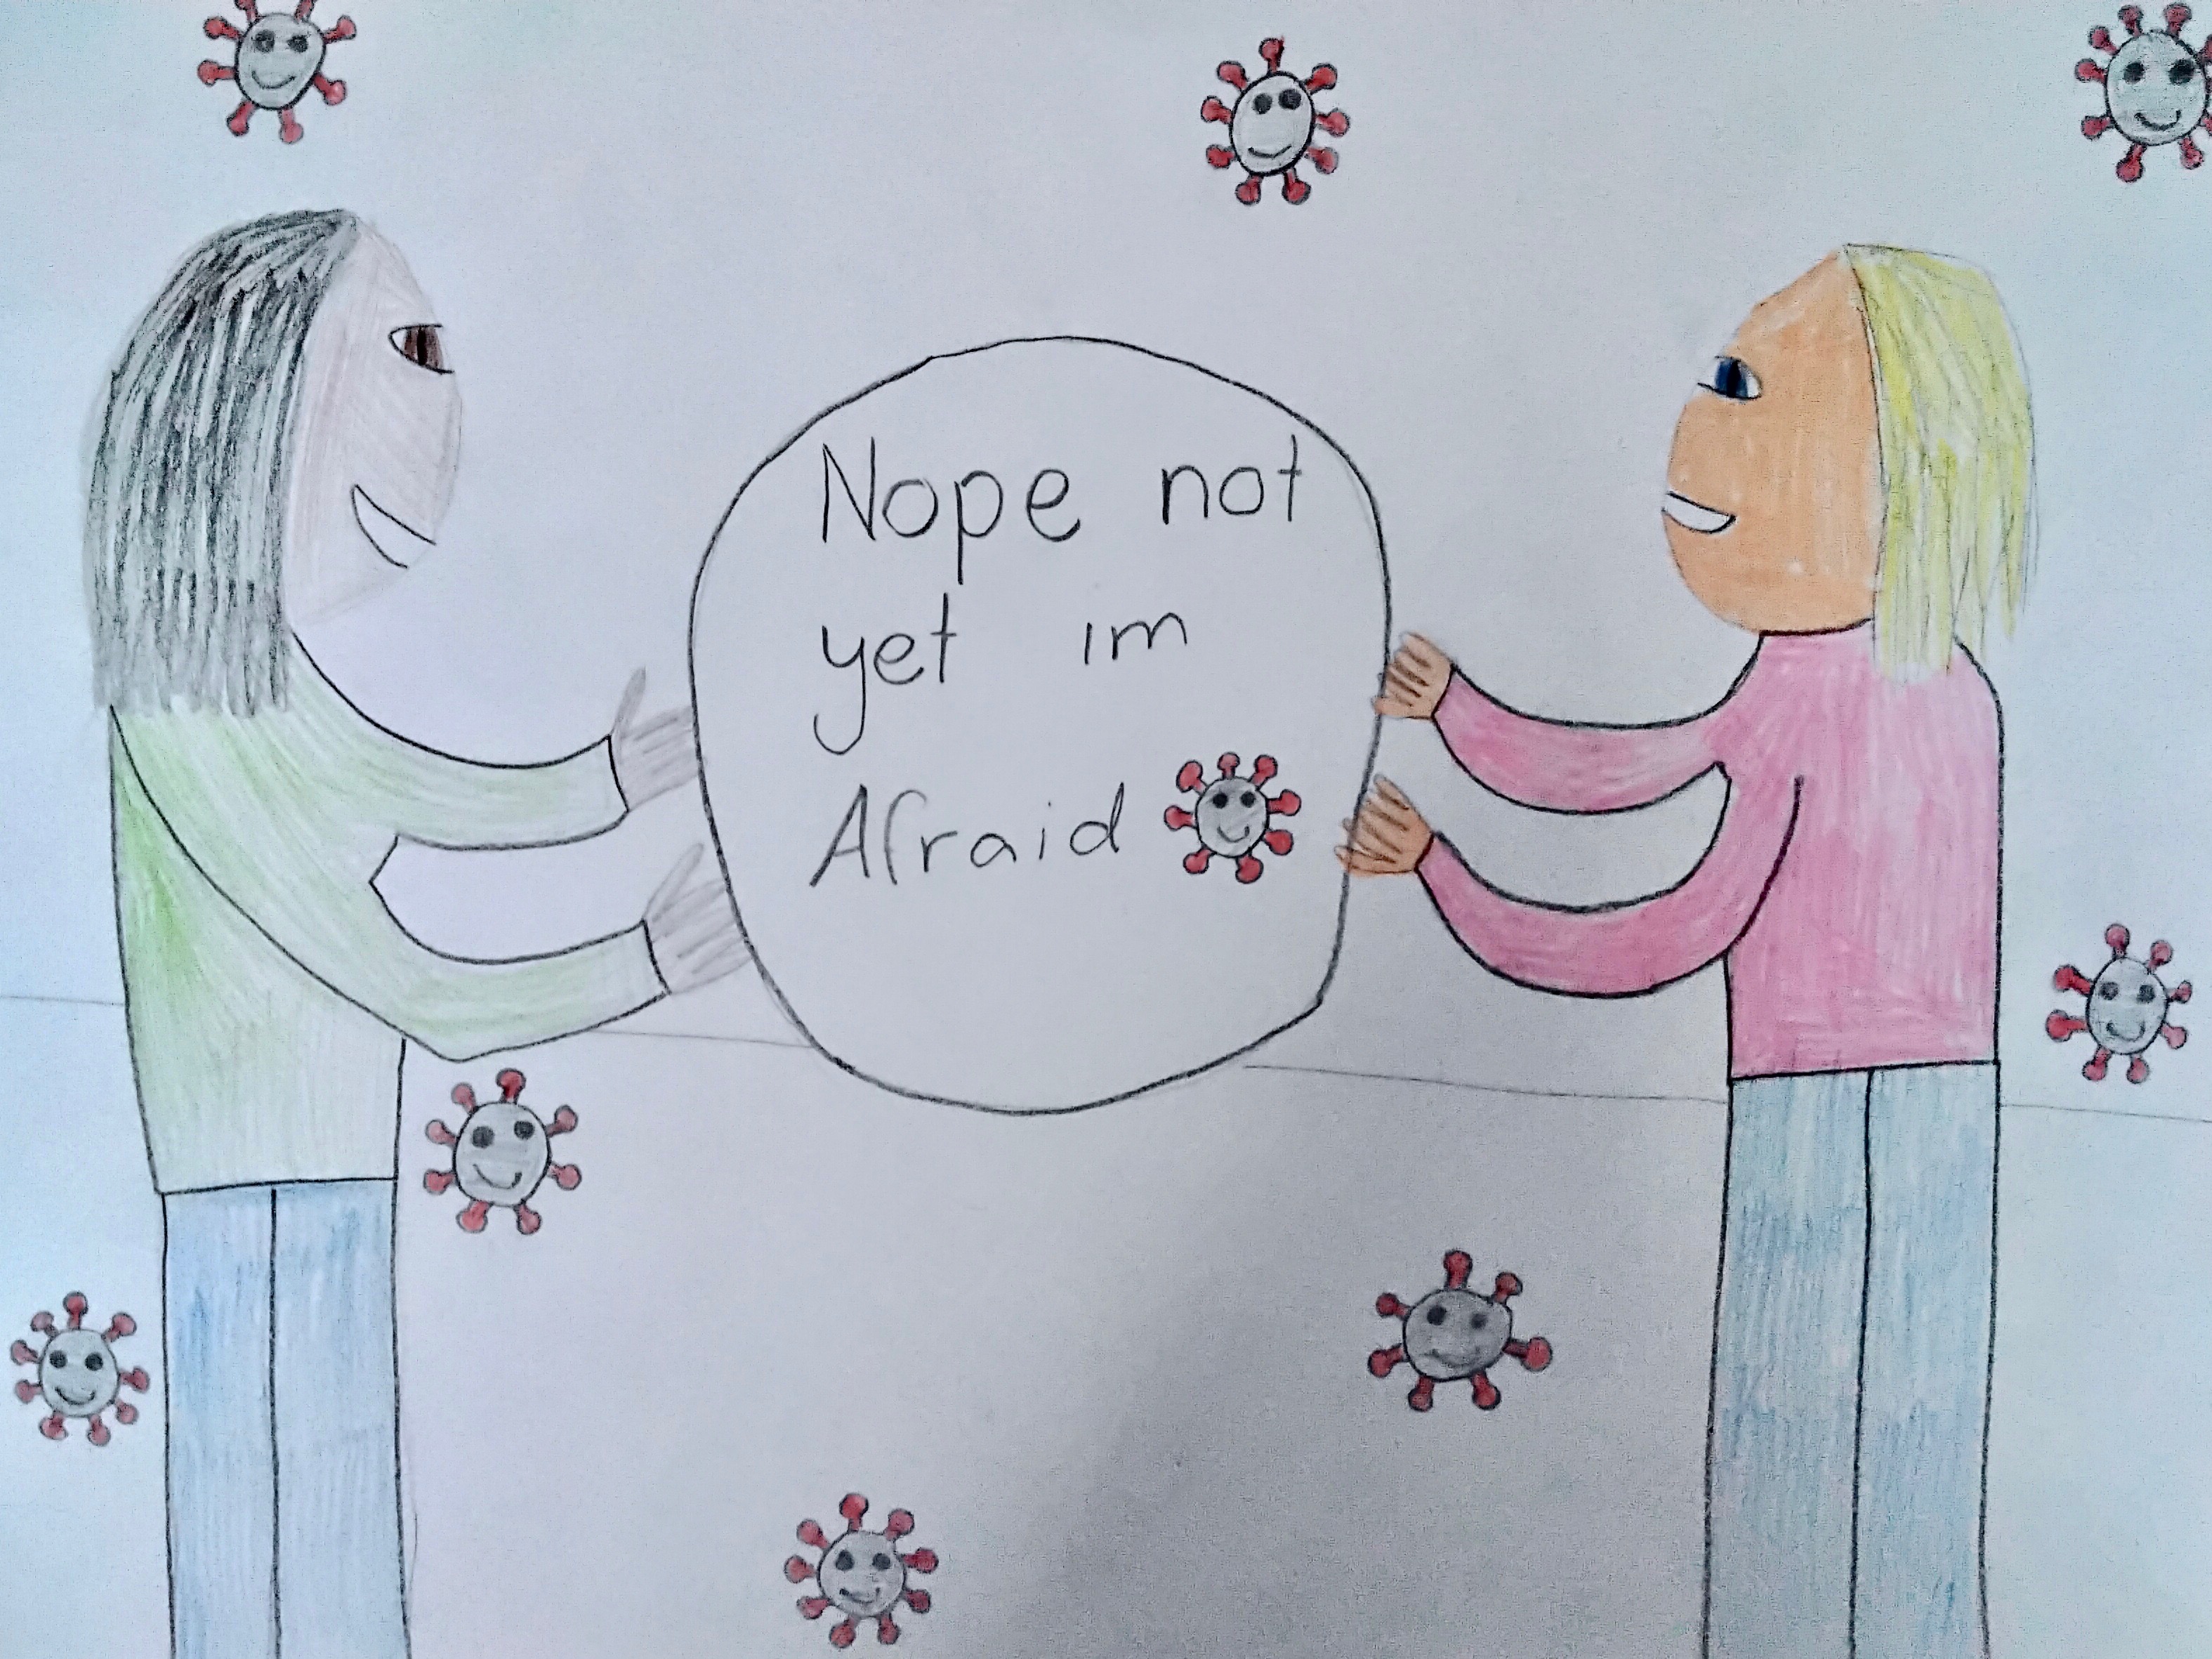 'We can't hug yet' by Saoirse (10) from Dublin